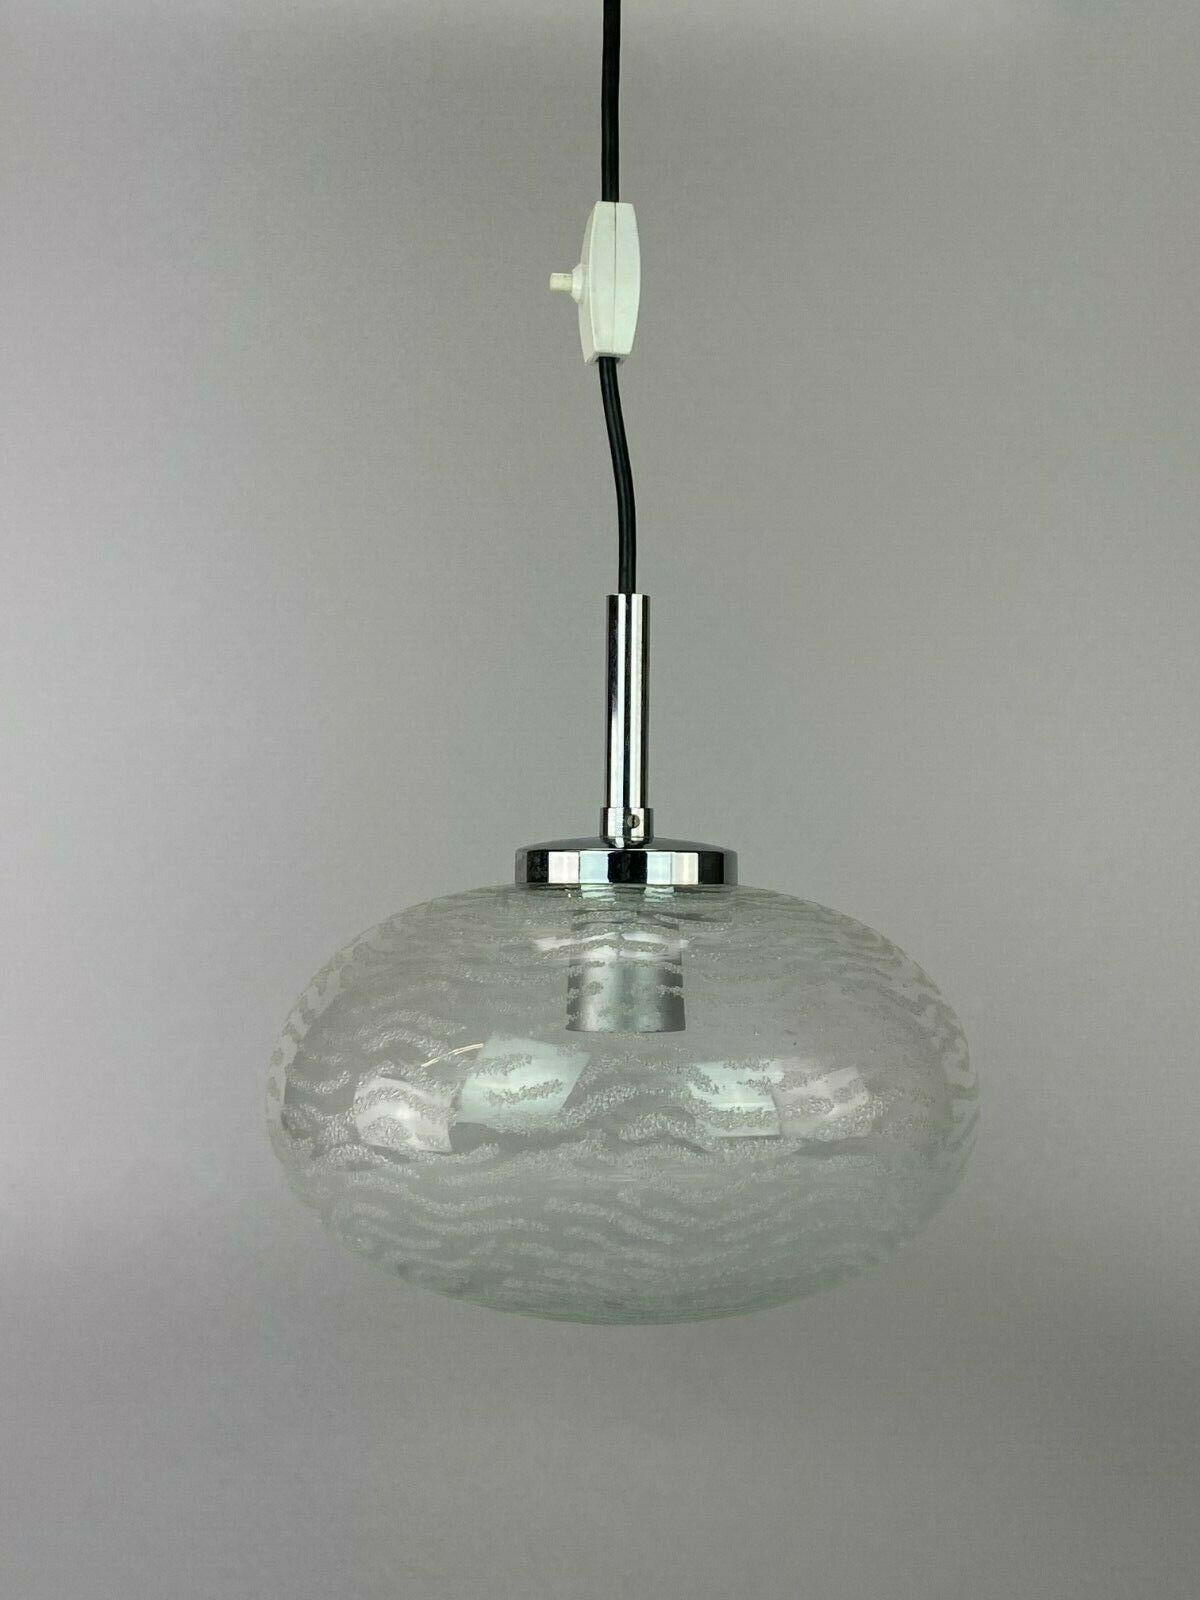 70s hanging lamp ceiling lamp lamp light space age glass Hustadt lamps

Object: lamp

Manufacturer: Hustadt lights

Condition: good

Age: around 1960-1970

Dimensions:

Diameter = 23.5cm
Height = 16cm

Other notes:

The pictures